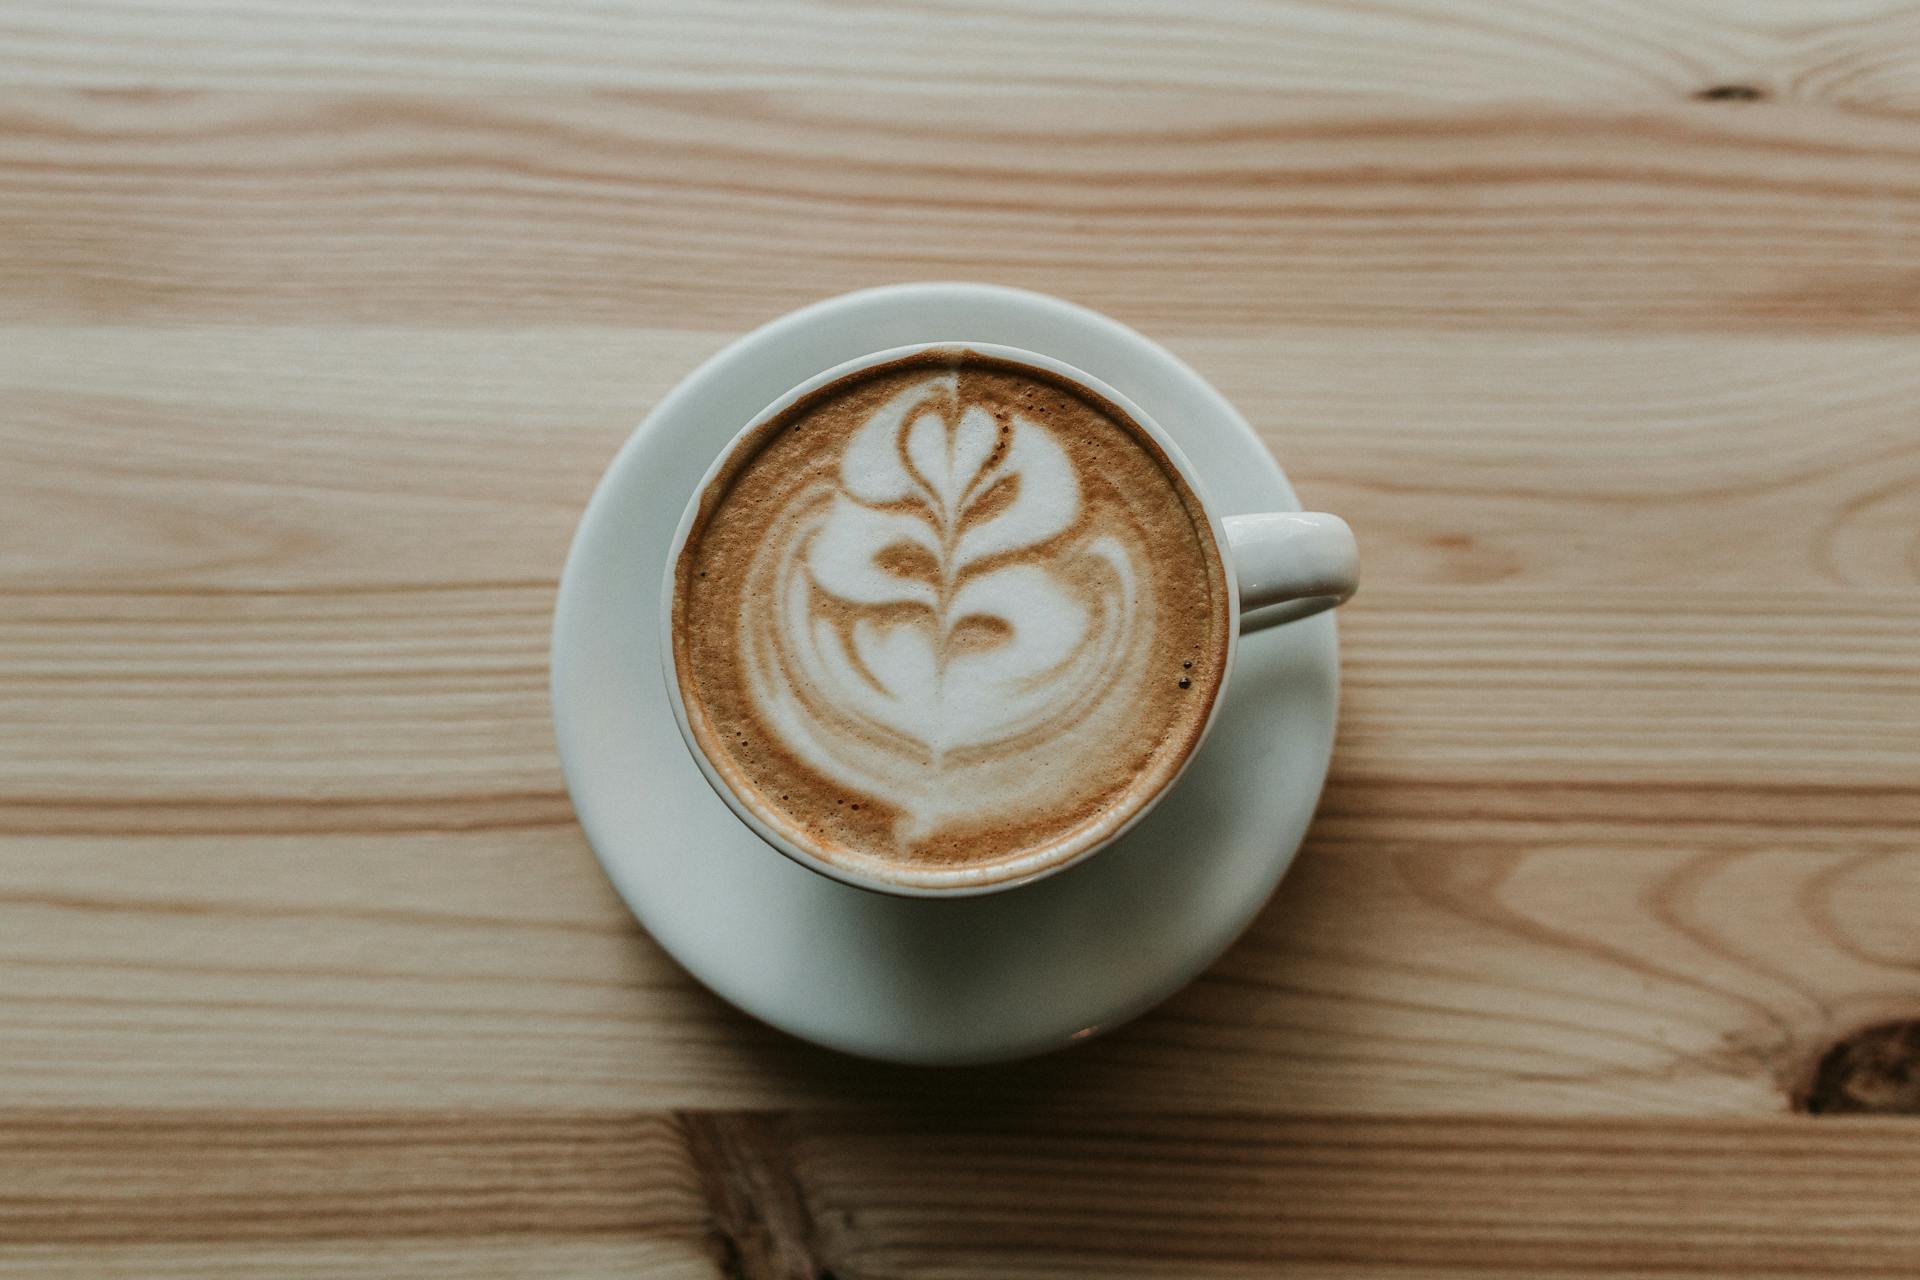 A cup of coffee | Source: Pexels